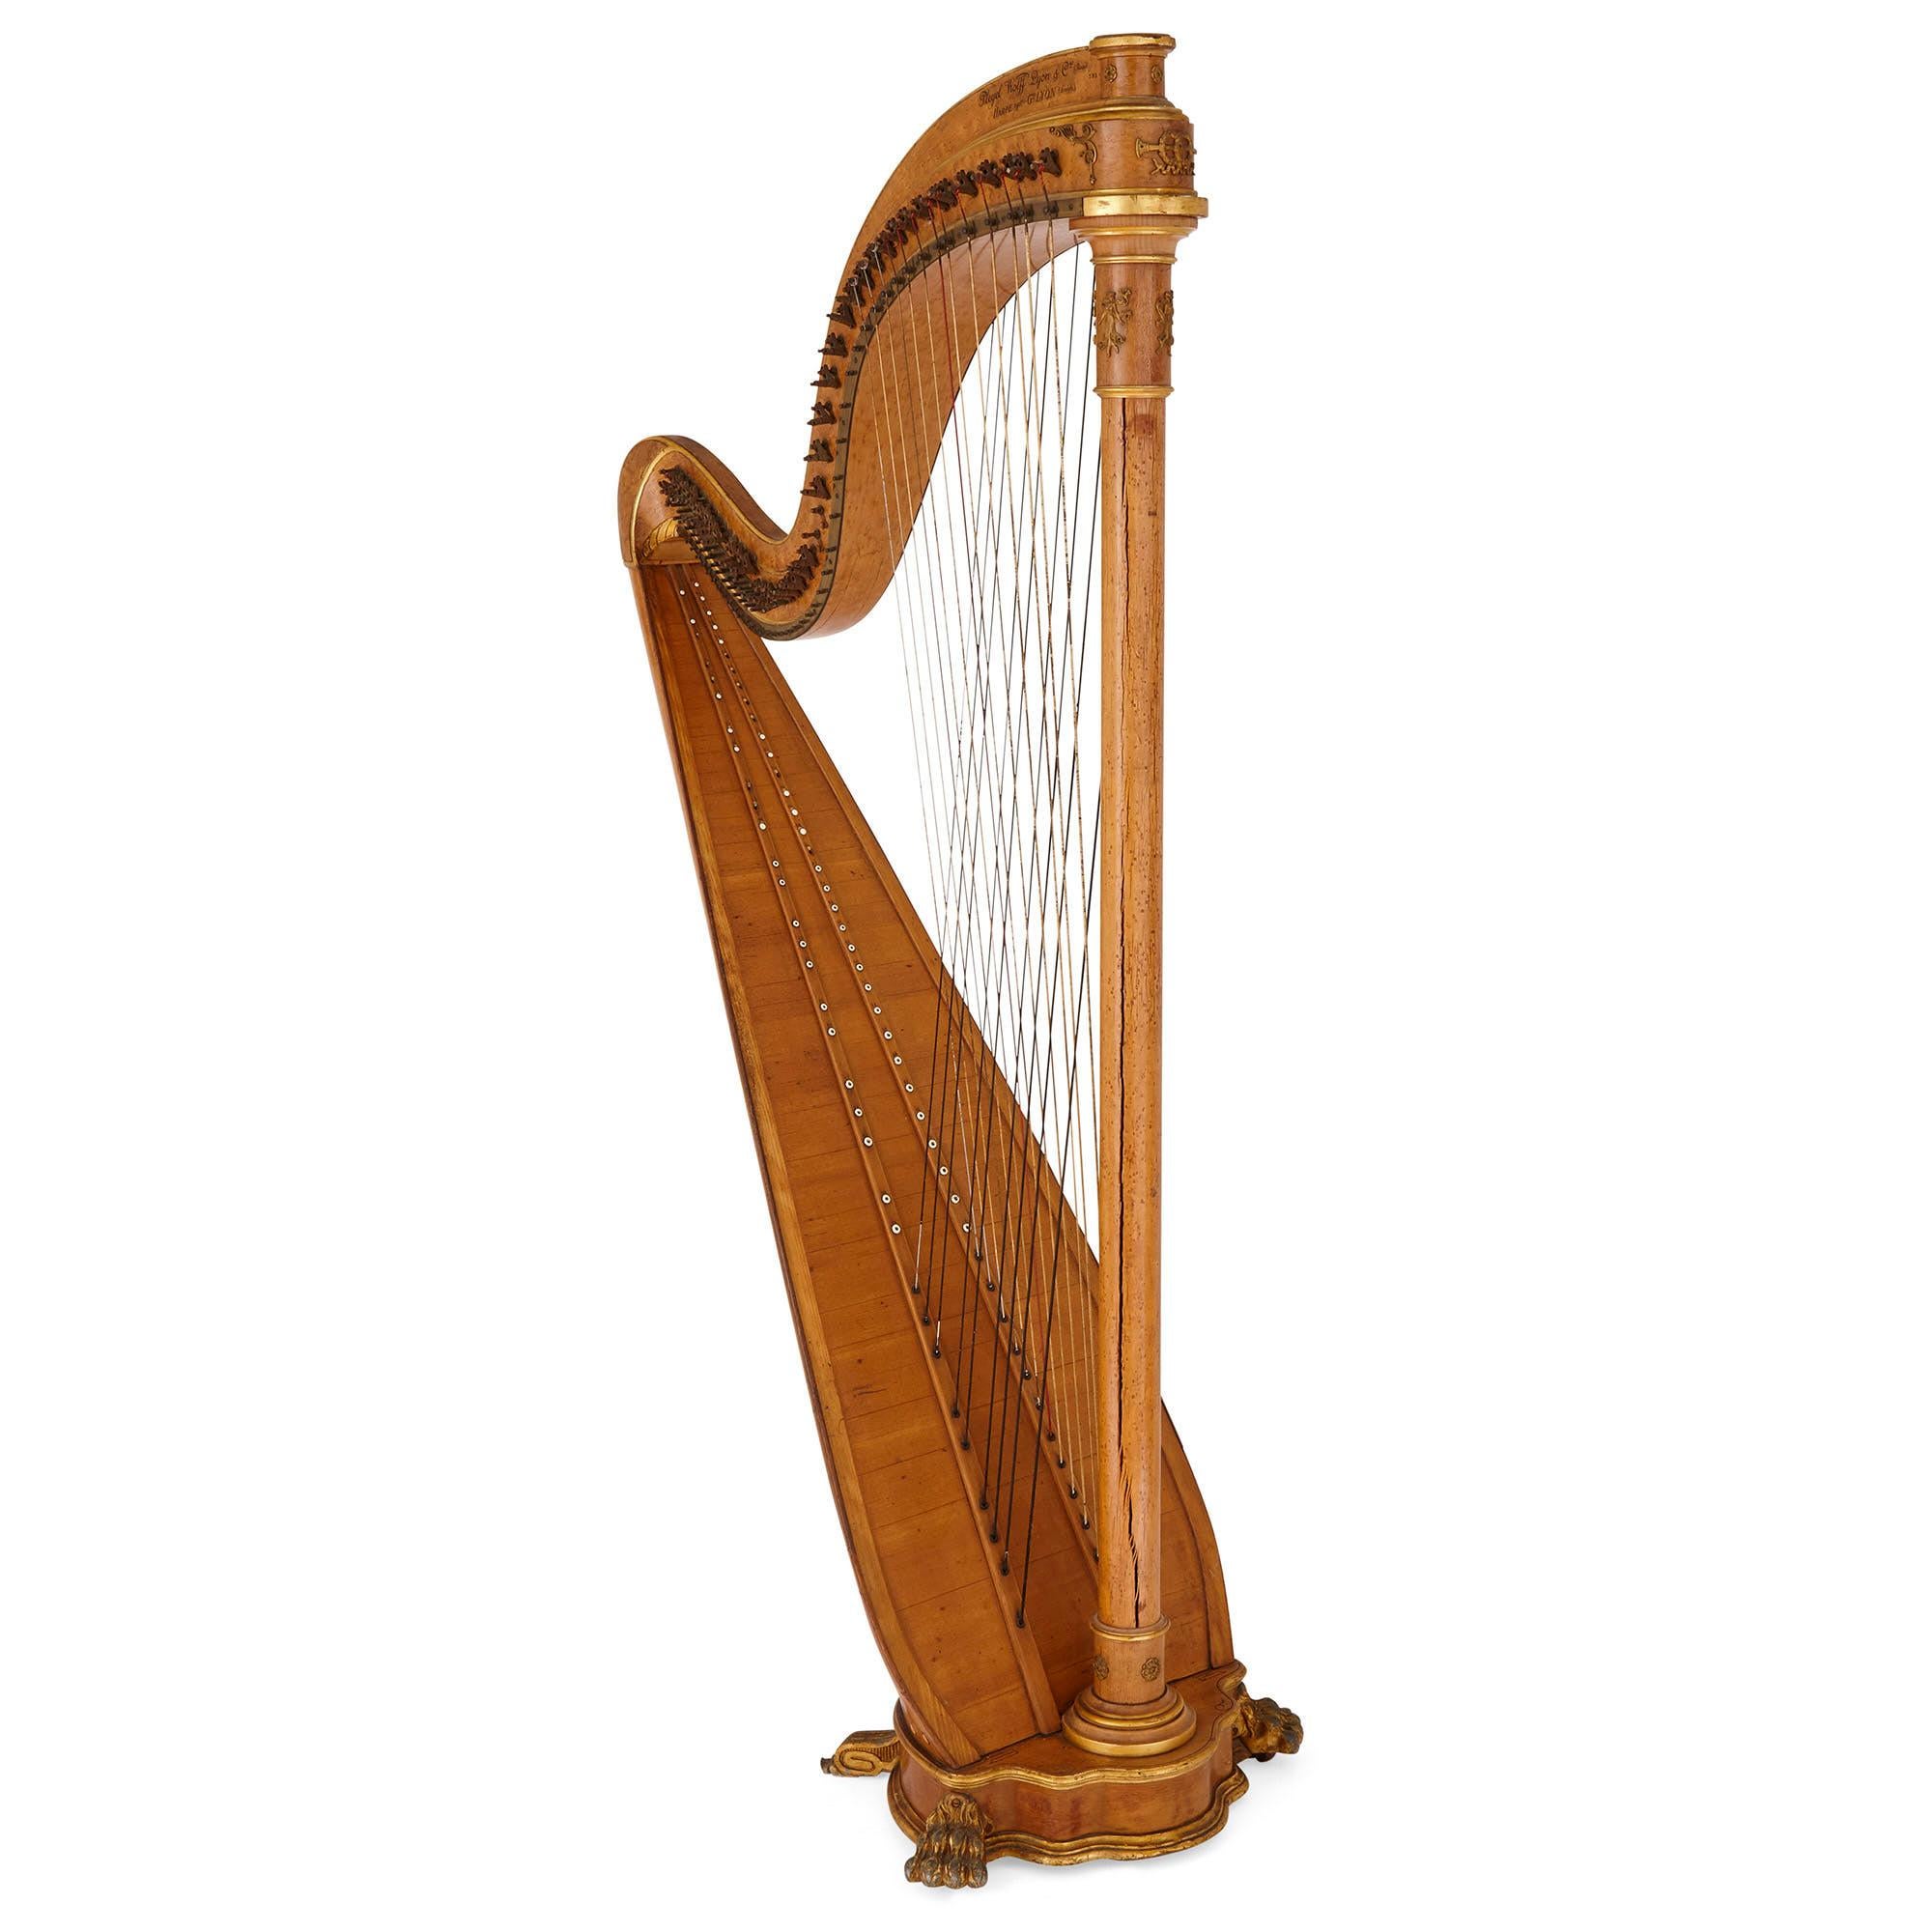 This fine antique harp dates from the second half of the 19th century and was made in France by Pleyel, Wolff, Lyon and Cie. The renowned Parisian firm manufactured musical instruments including pianos, harpsichords and harps, made from the finest